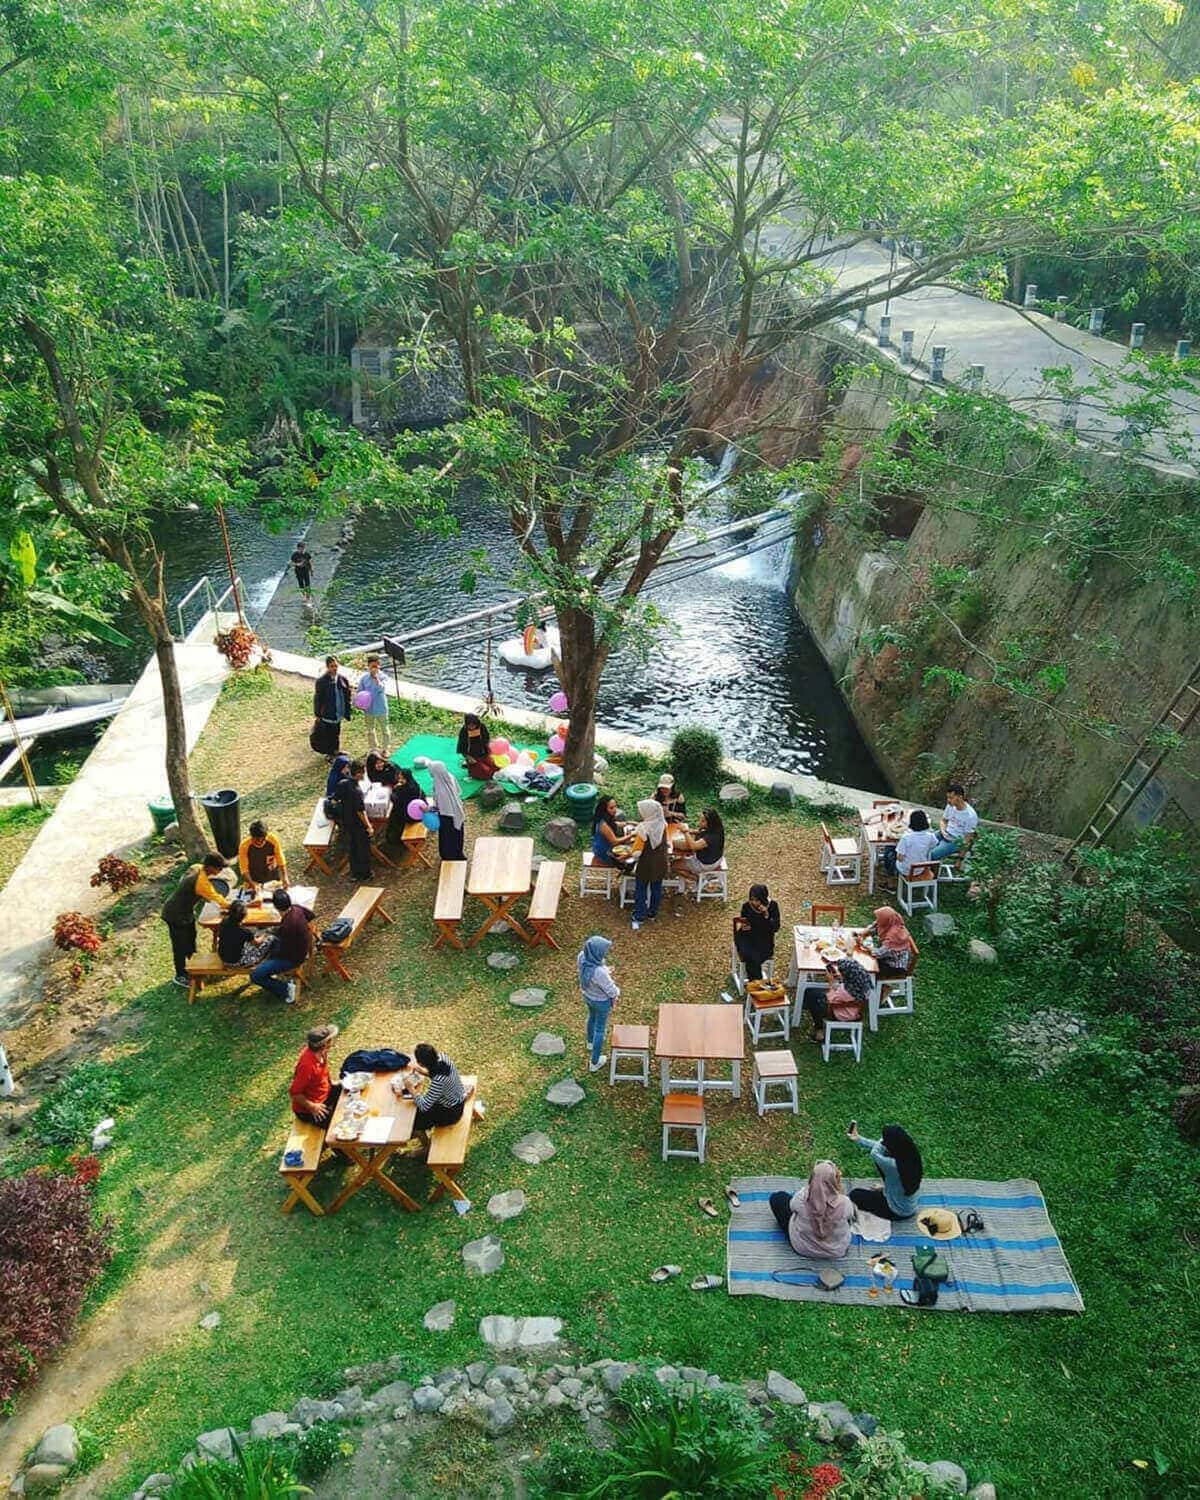 22 Great Spots for Your Summer Fun, Food and Friends in Yogyakarta